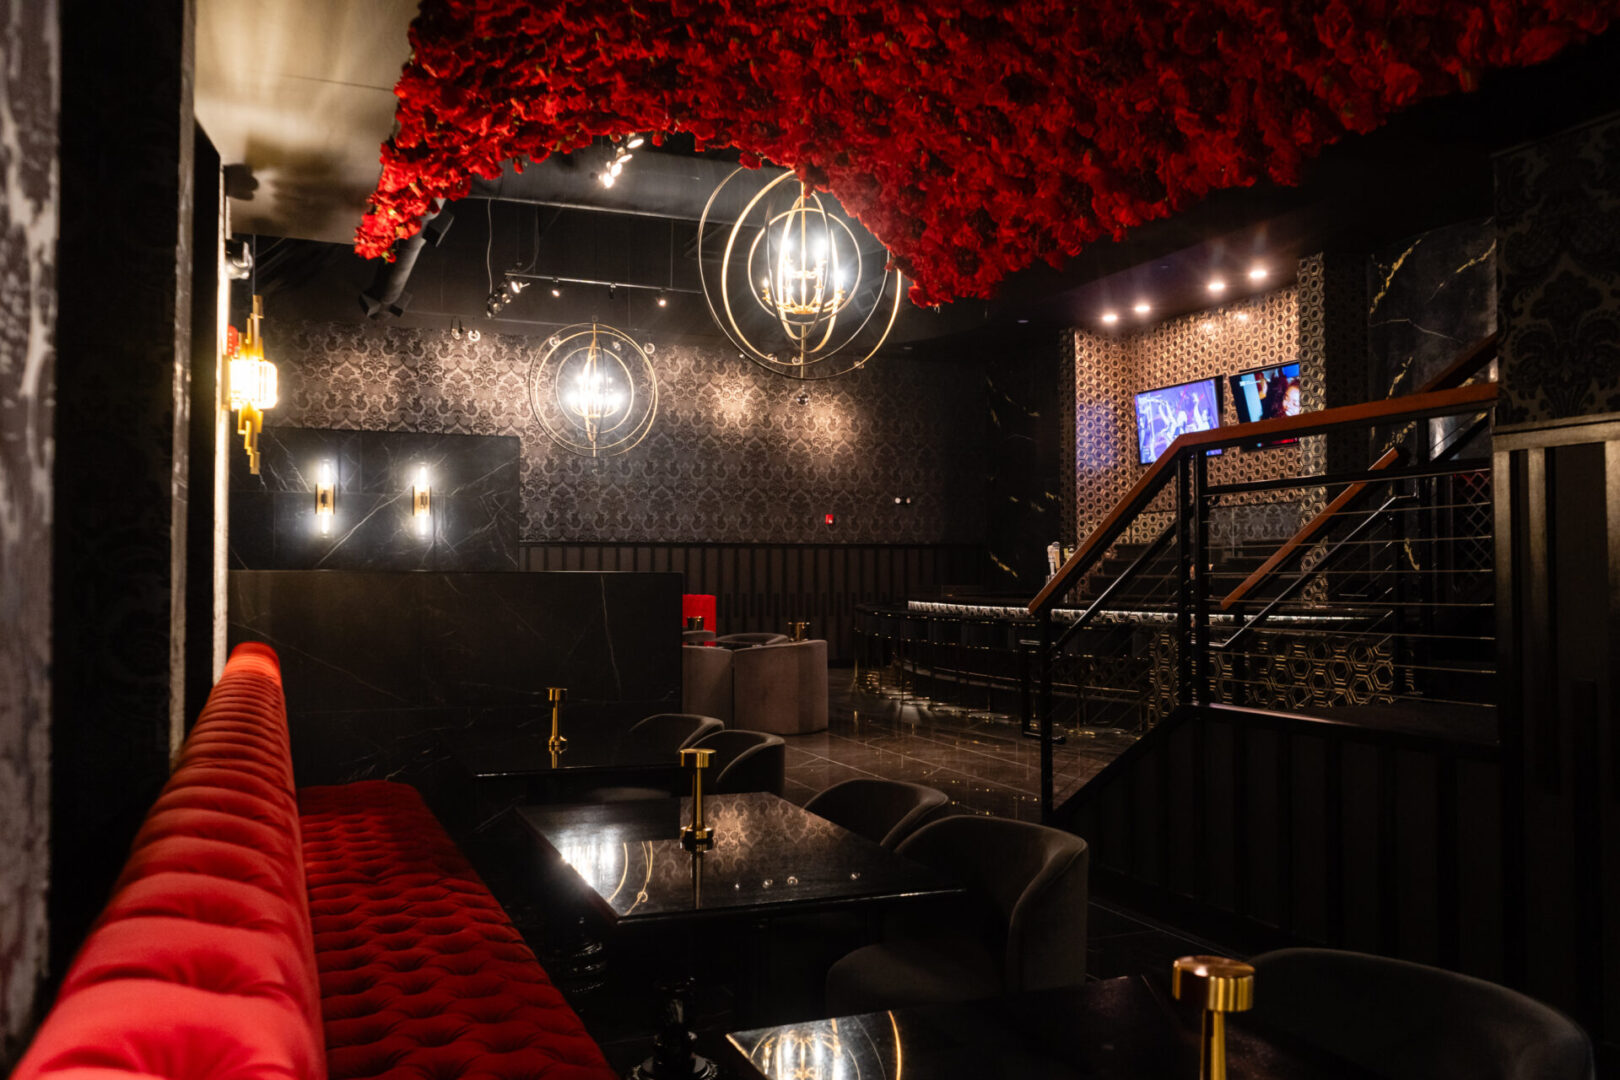 A luxury lounge with a black and red bar and a chandelier hanging from the ceiling.